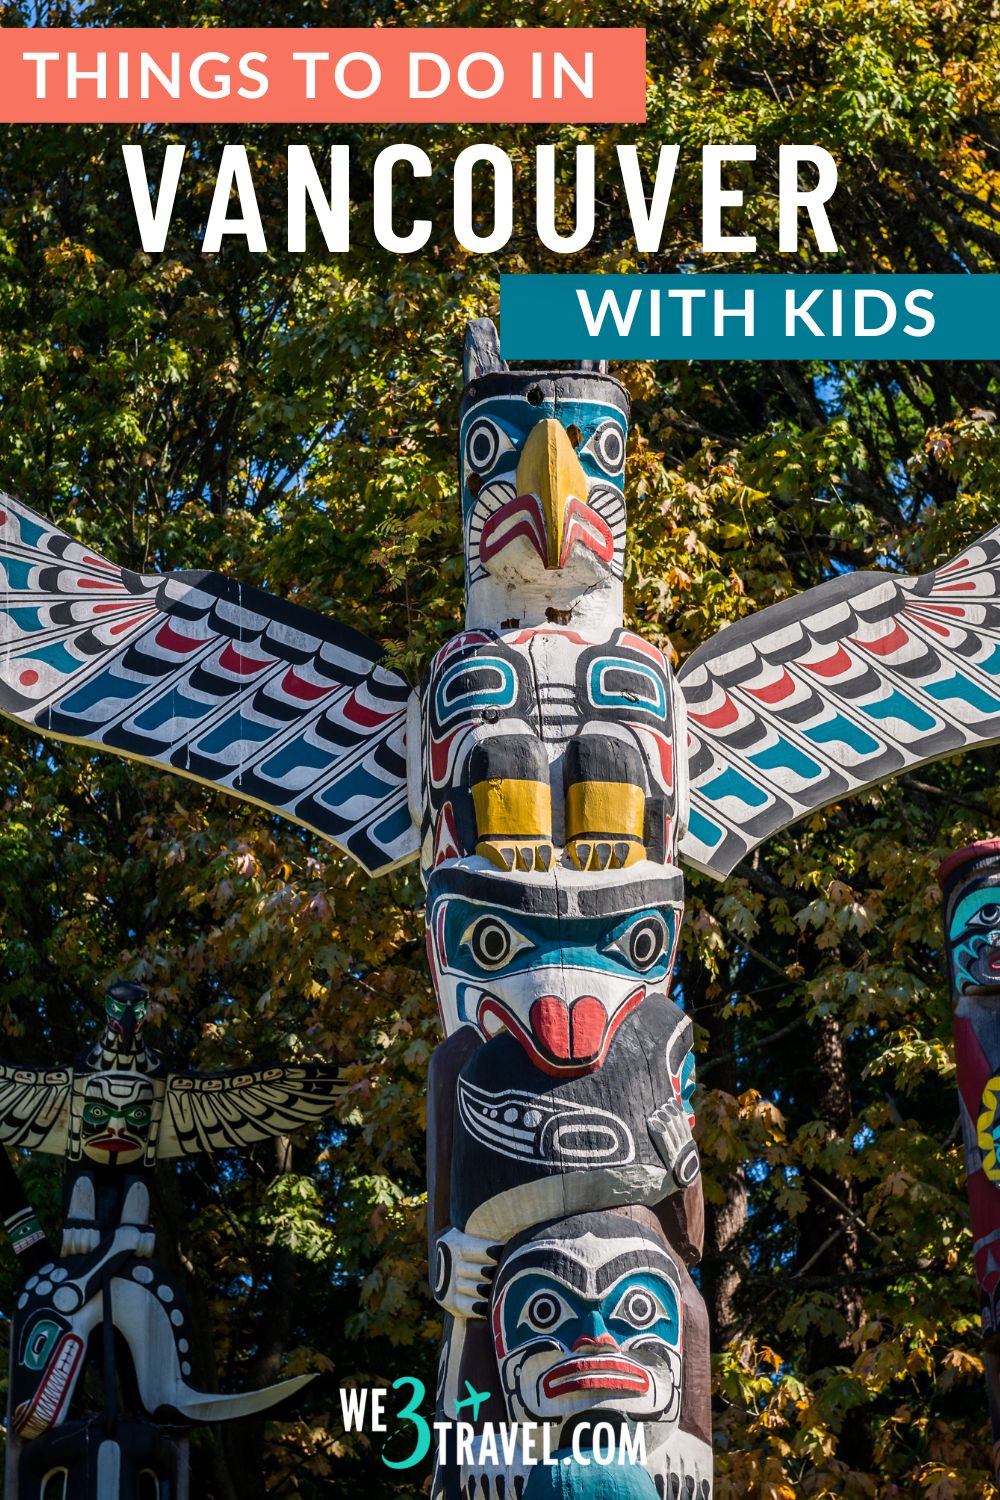 If you are visiting Vancouver British Columbia in Canada with your family, you will want to check out these top things to do in Vancouver with kids (especially if it is raining!)